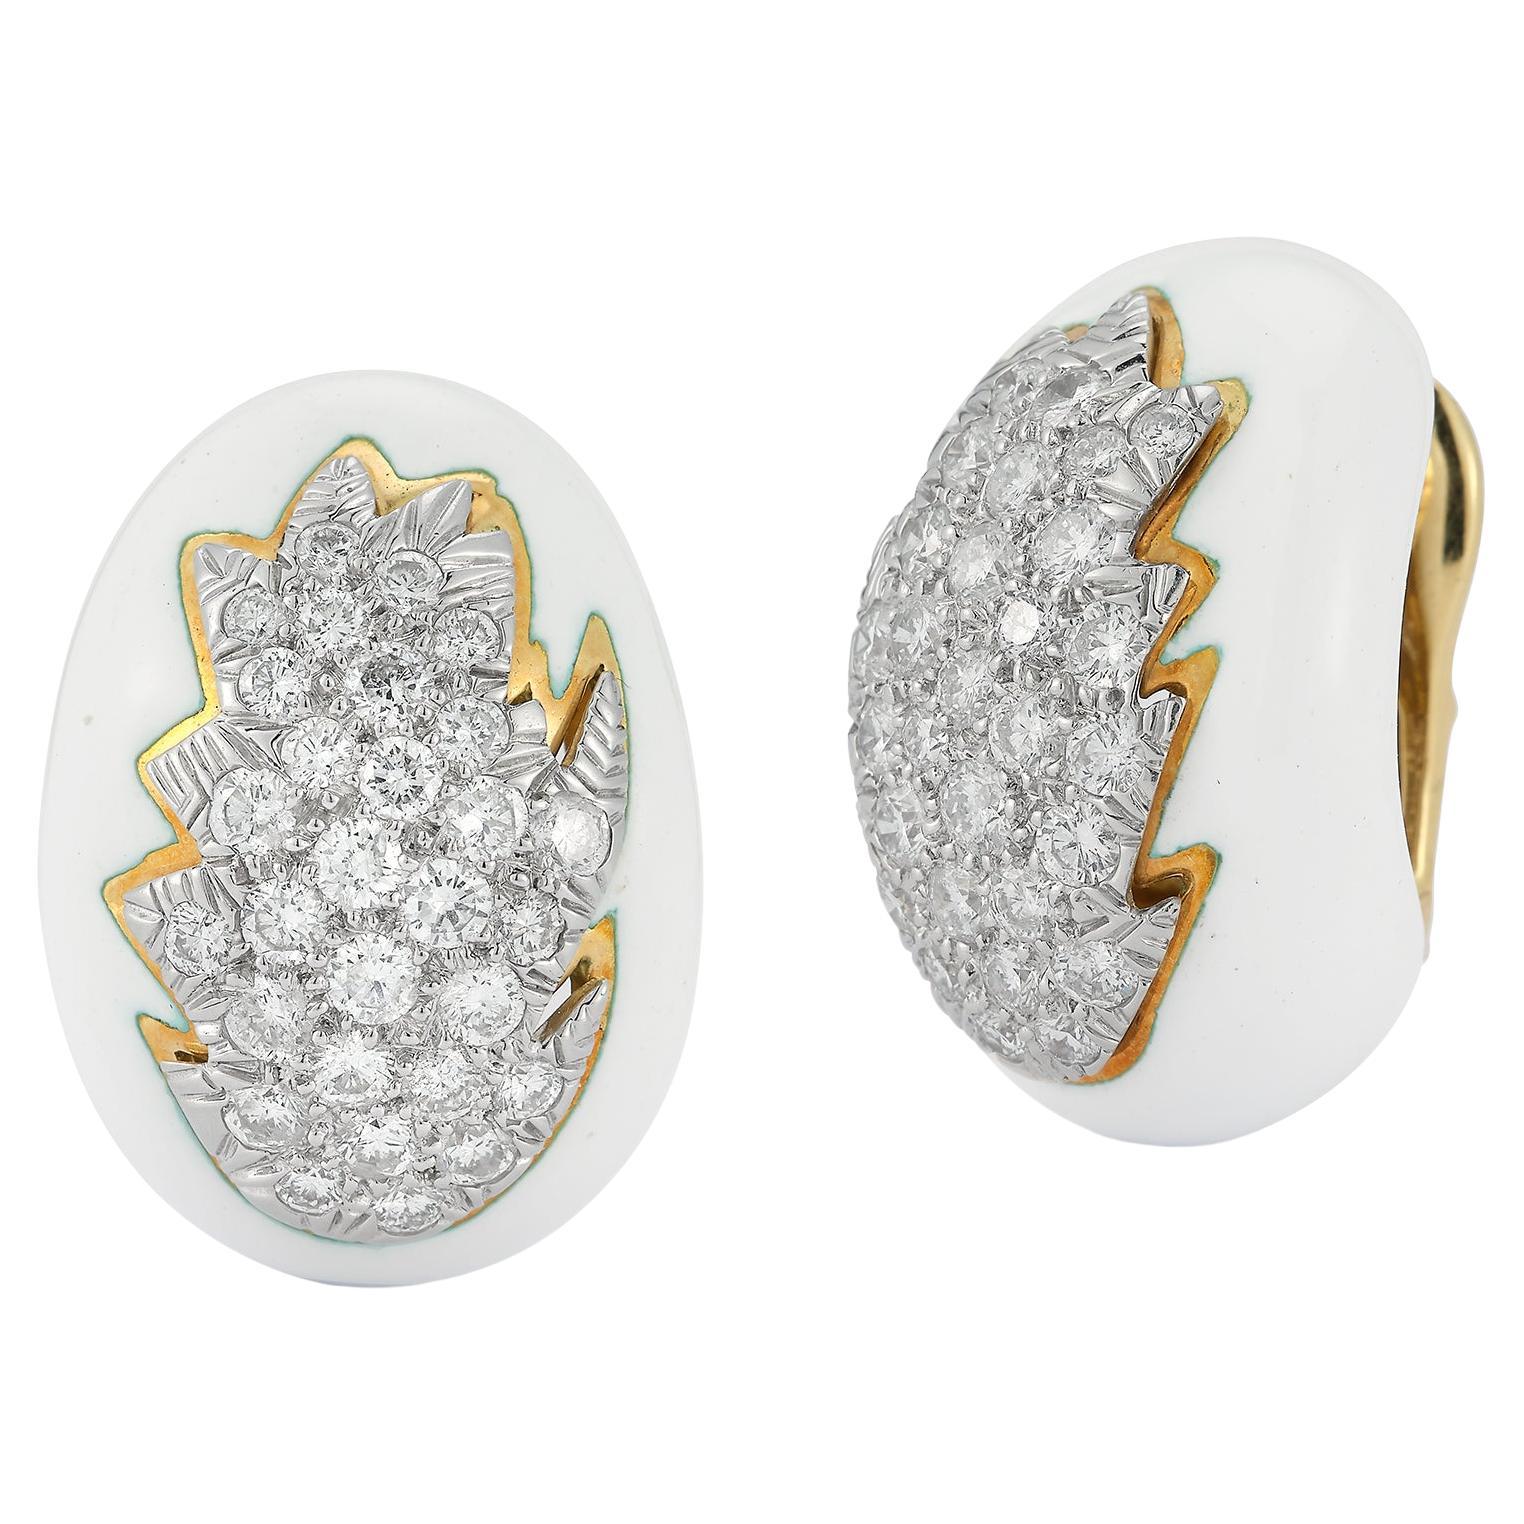 White Enamel and Diamond earrings by David Webb 

A cluster of round cut diamond surrounded by white enamel set in 18k yellow gold & platinum.

Measurements: 1